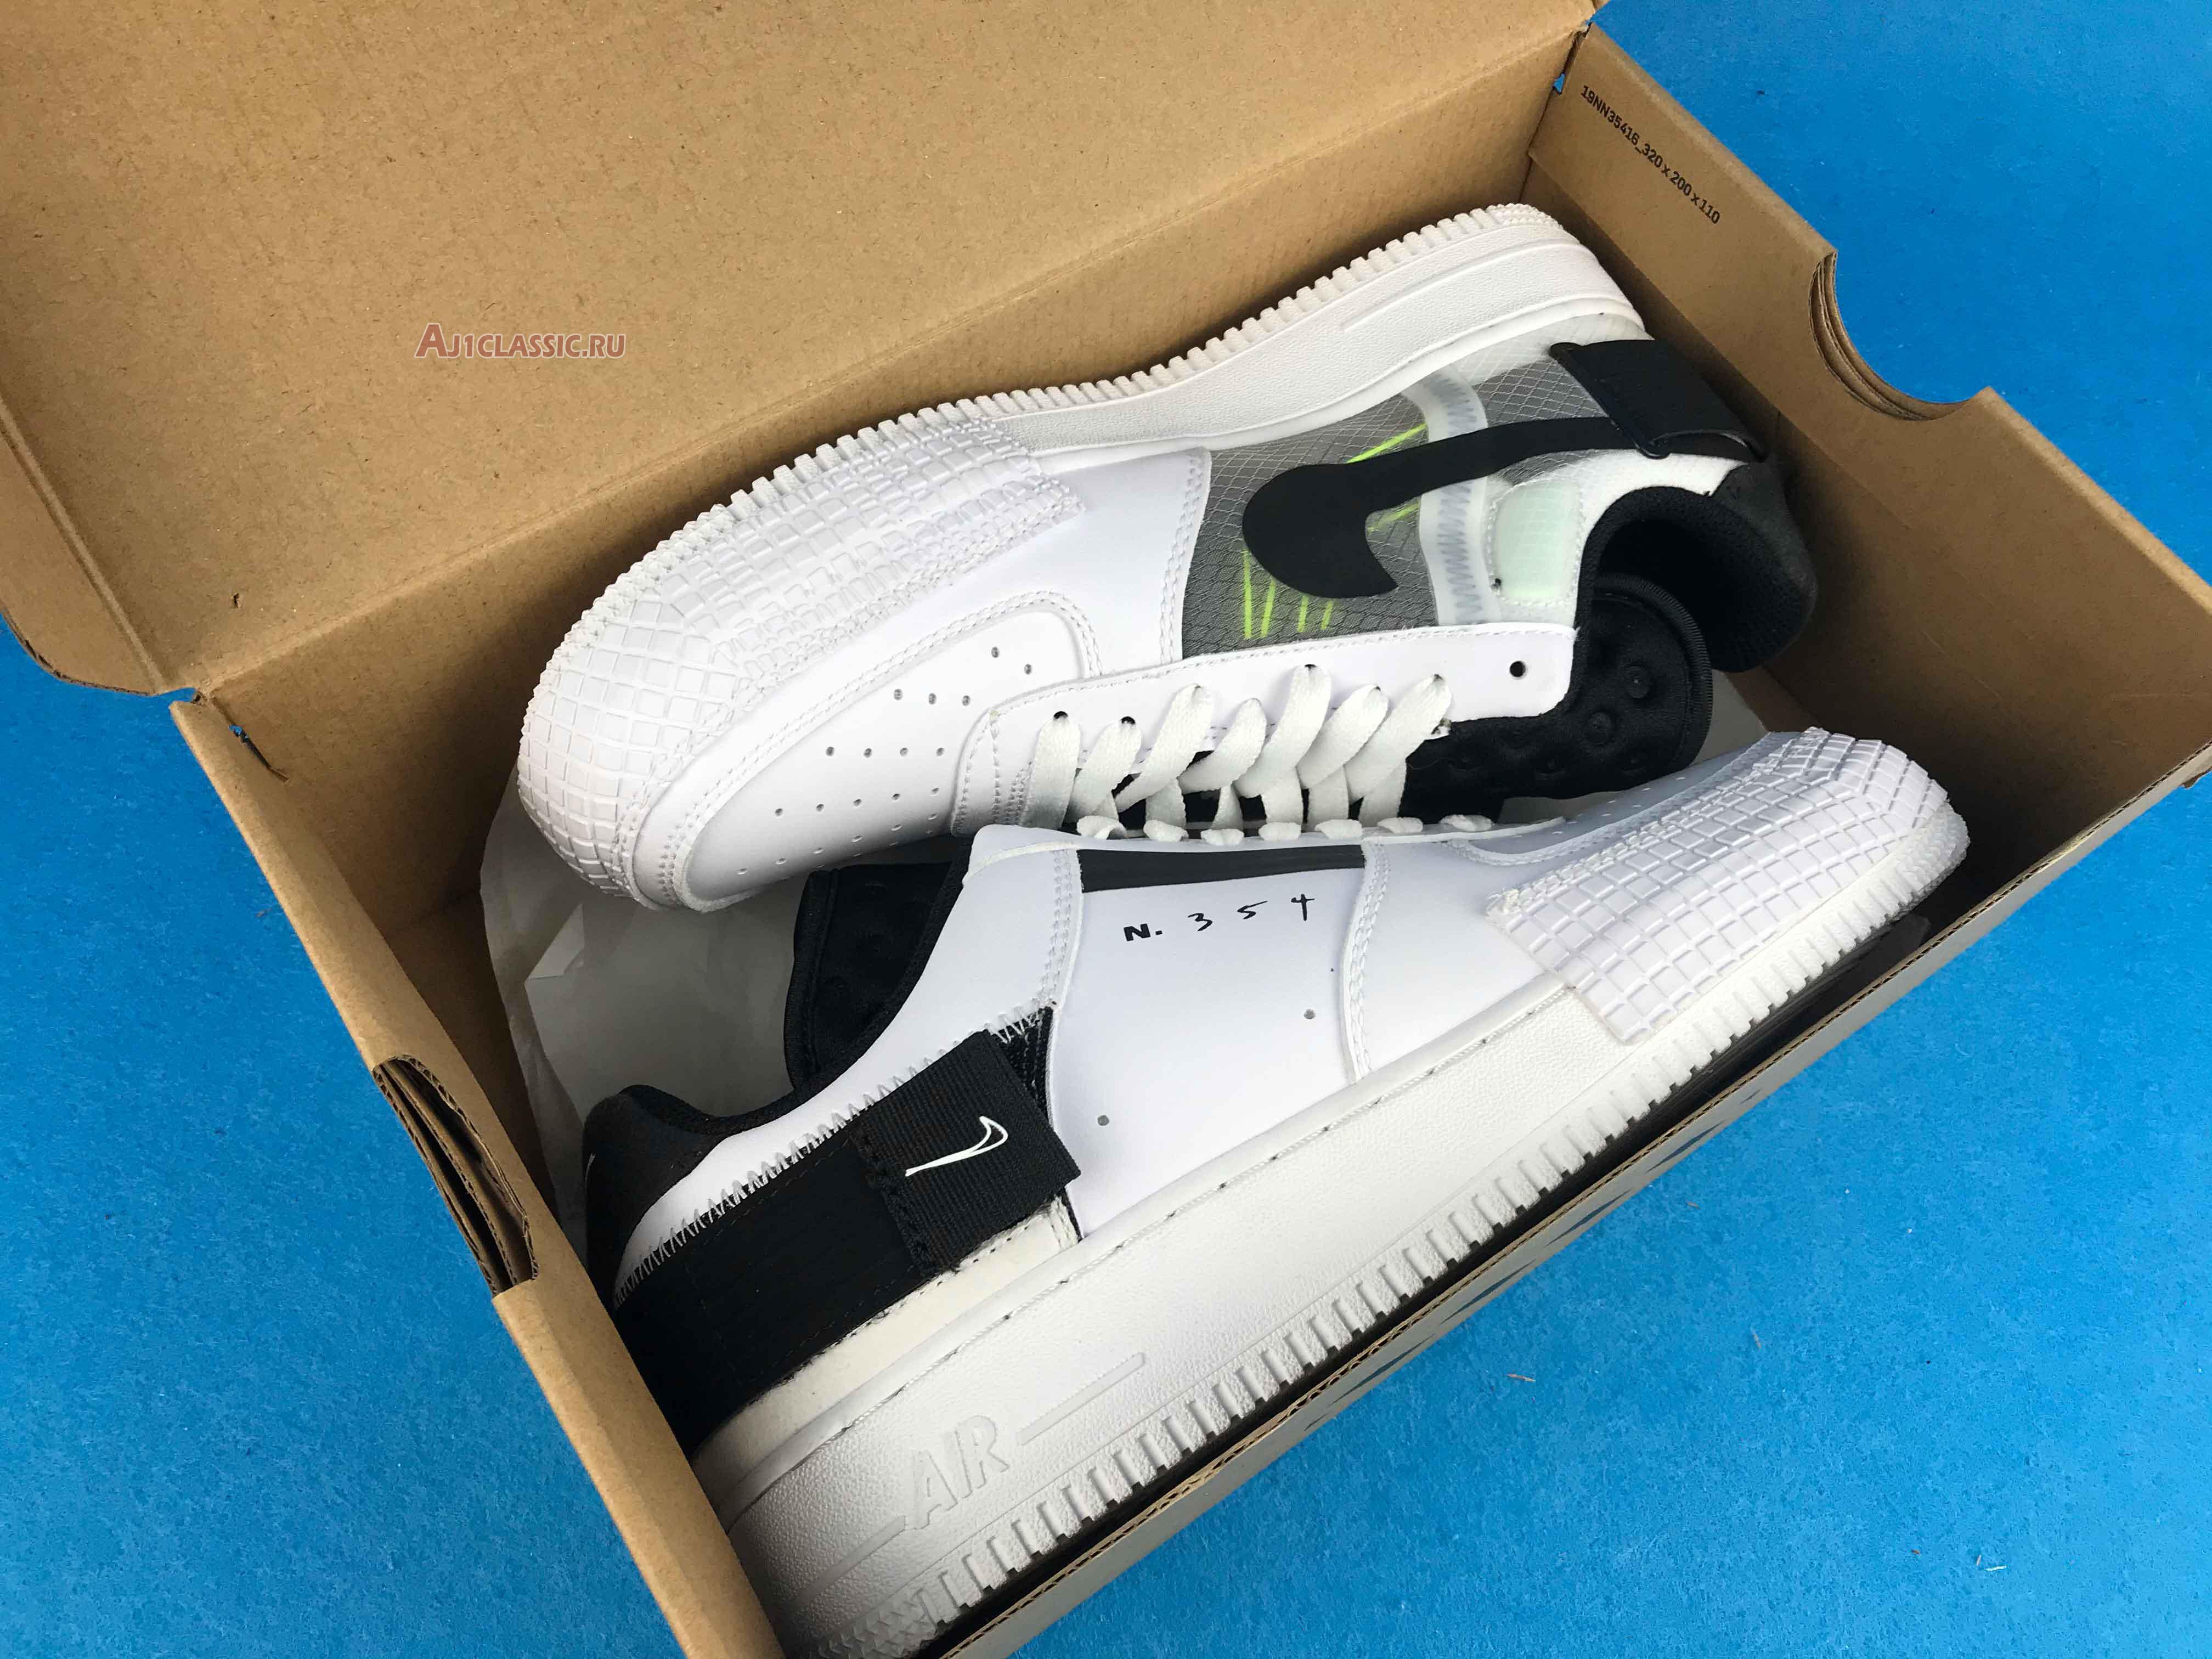 Nike Air Force 1 Type N.354 AT7859-101 White/Volt-Black-White Sneakers